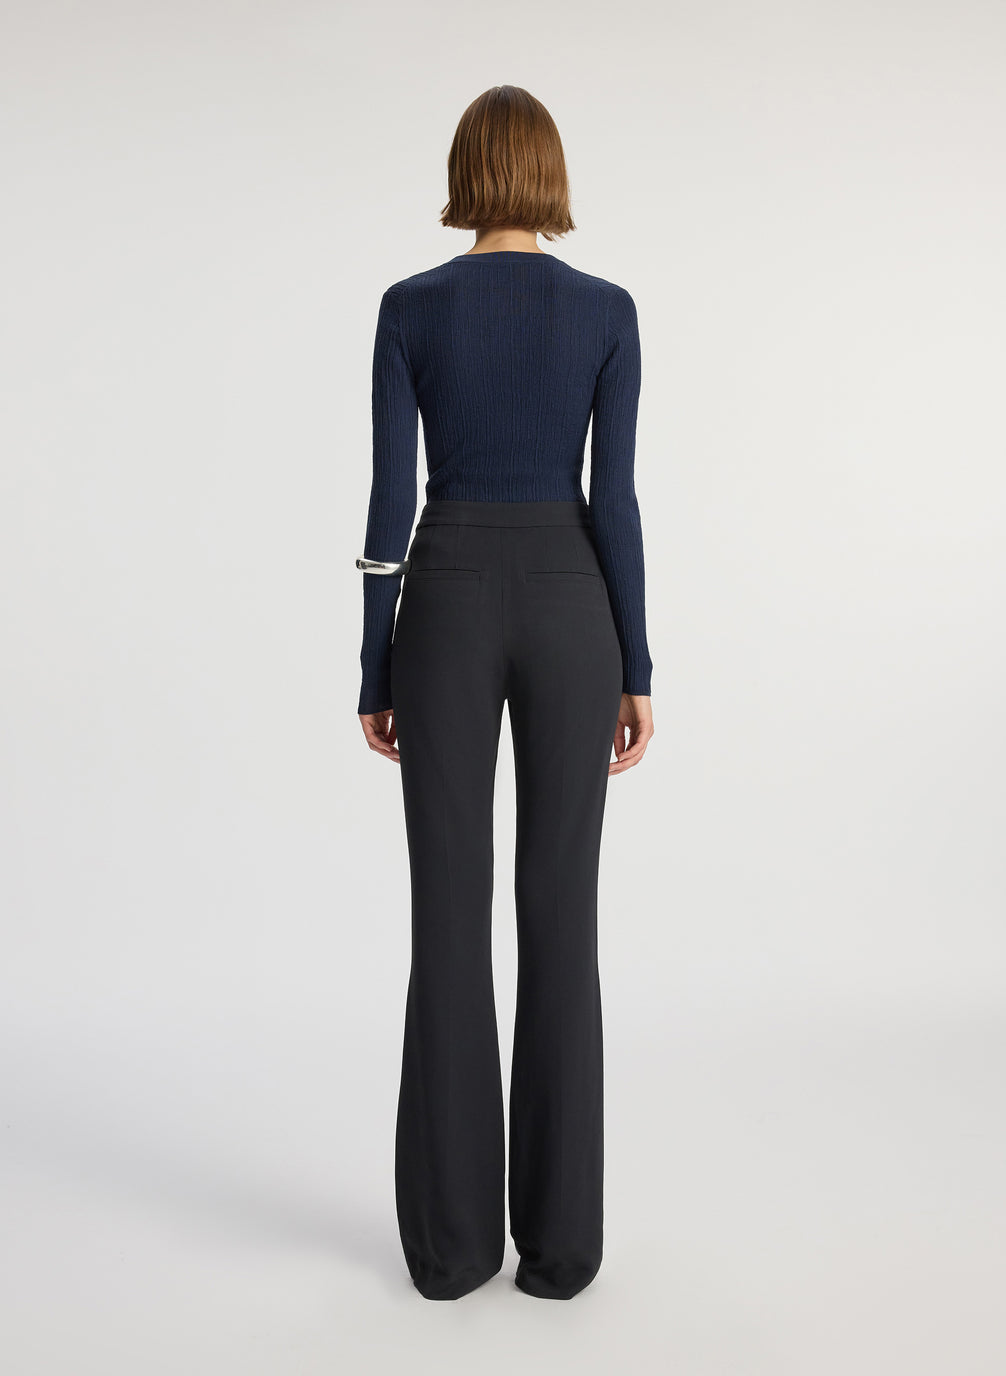 back view of woman wearing navy cardigan and black flared pants